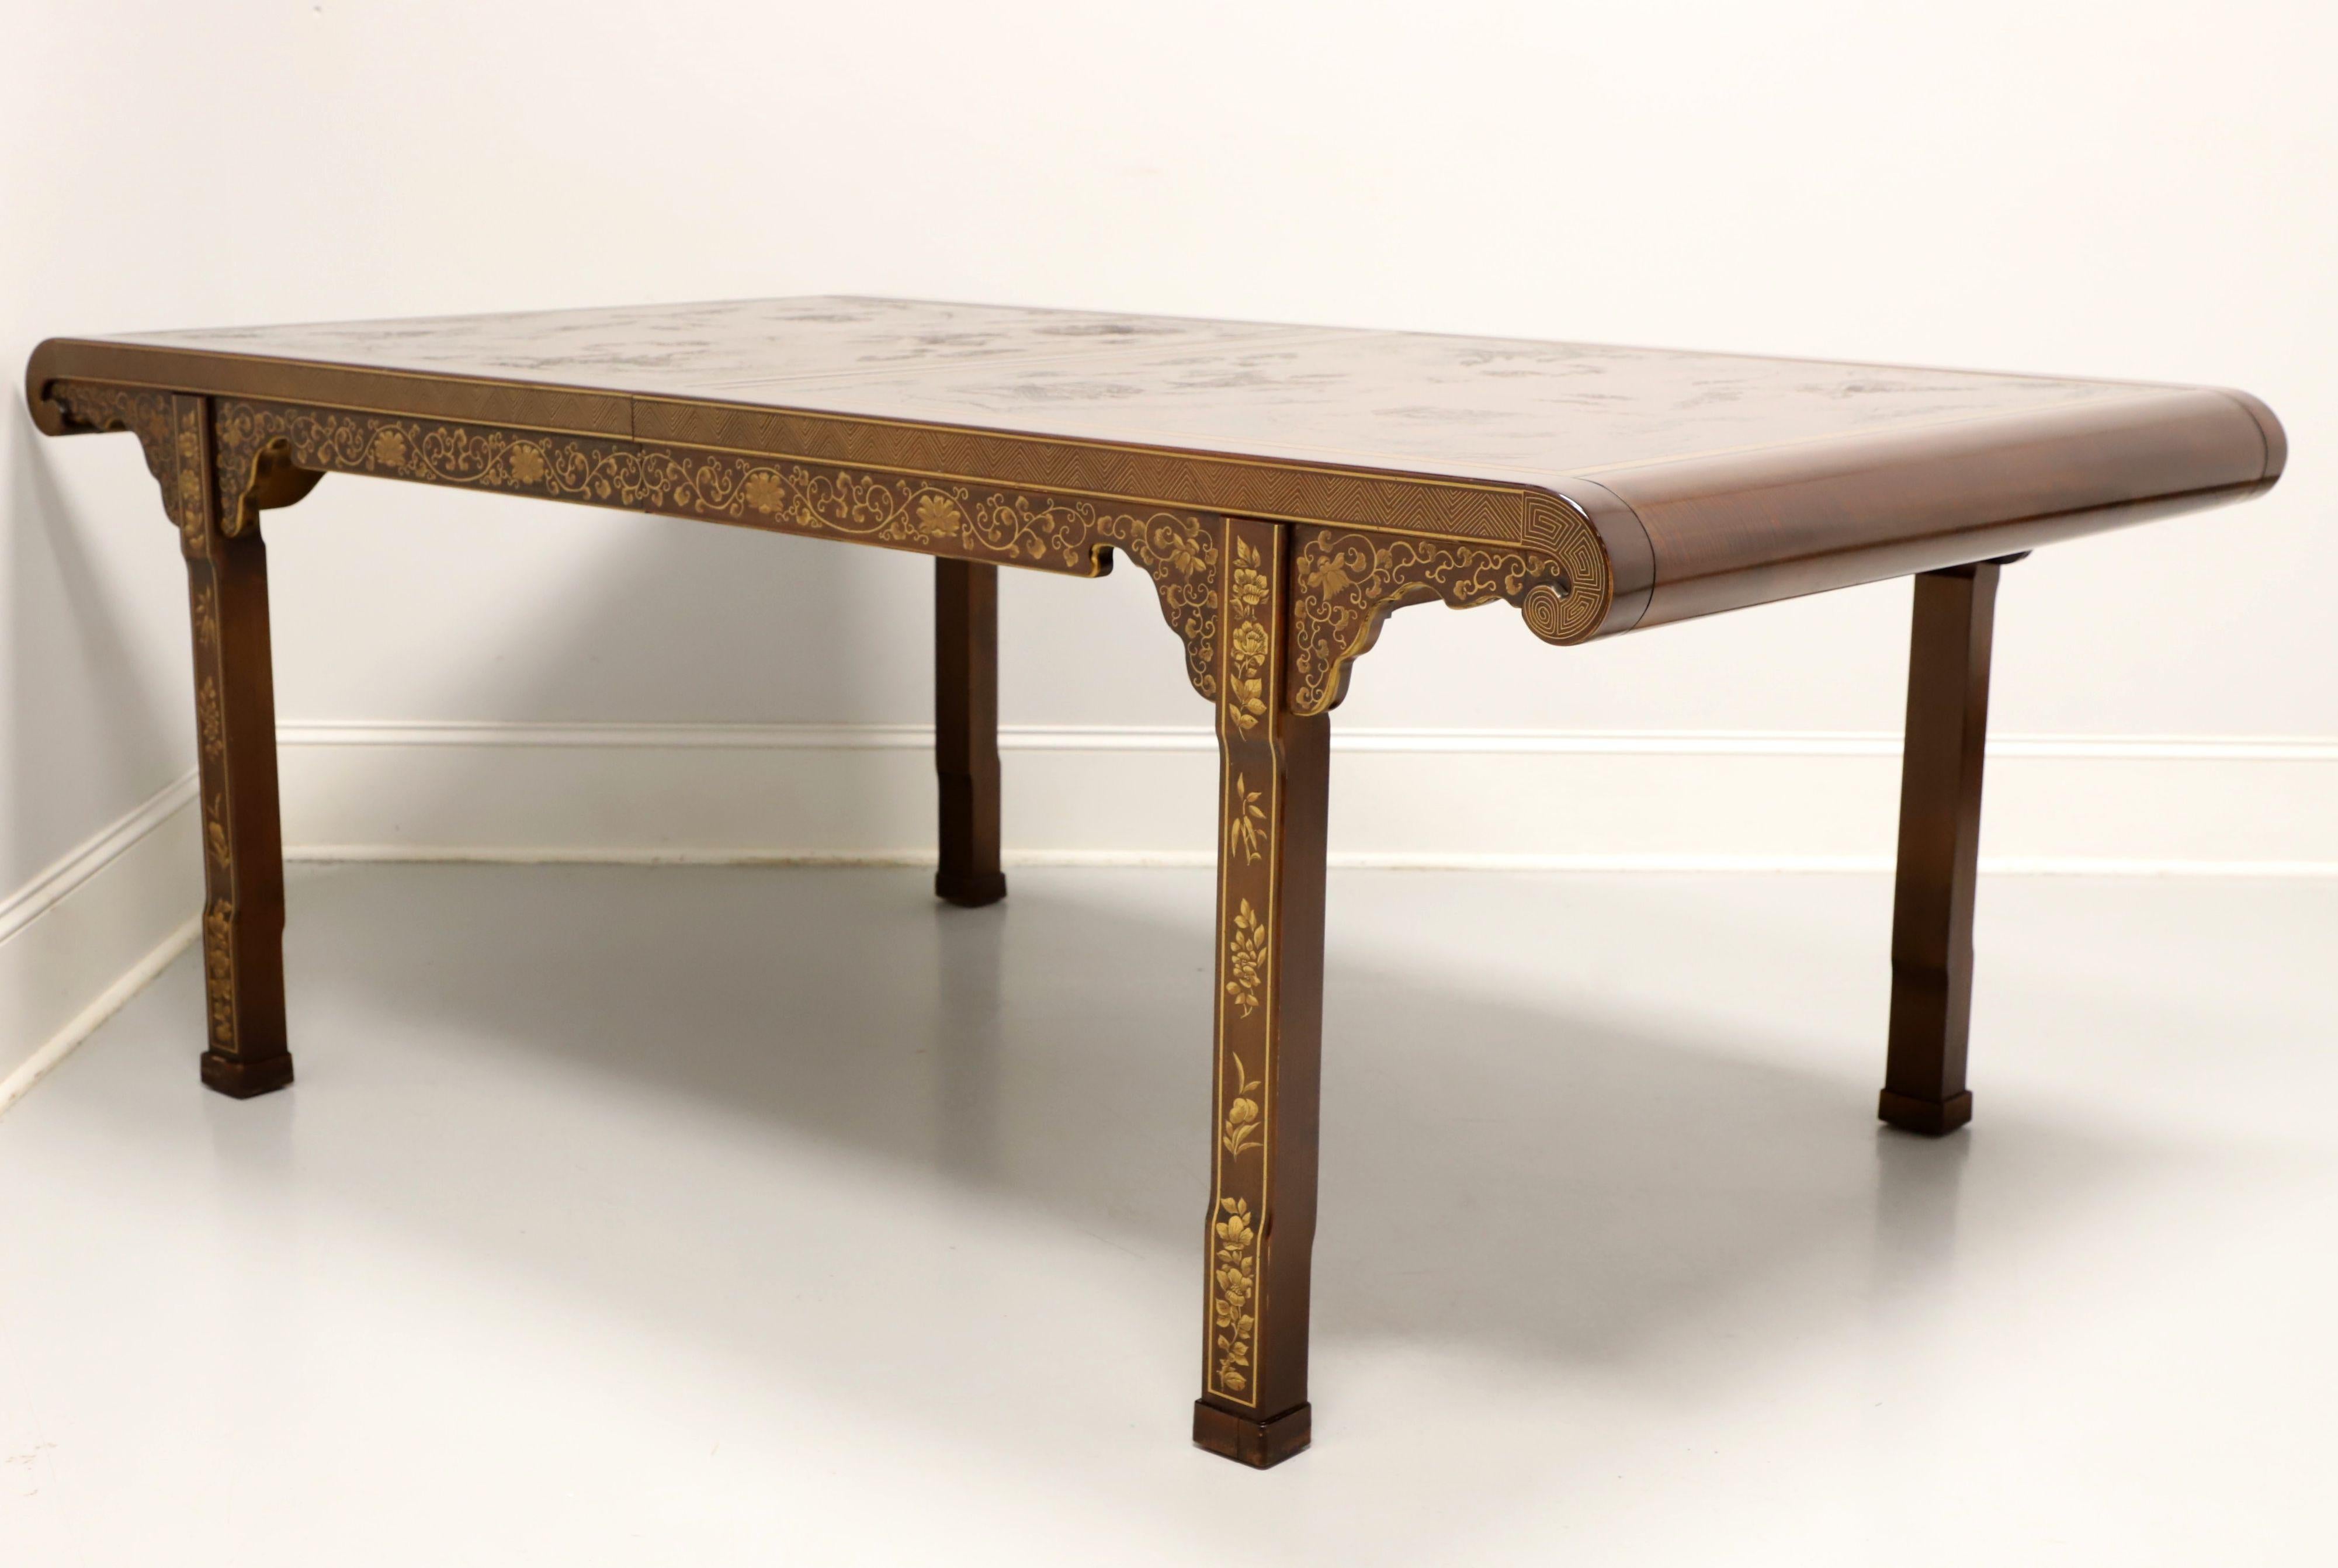 An Asian Ming style rectangular dining table by Drexel Heritage, from the Ming Treasures Collection. Mahogany & veneers, carved & painted Chinoiserie scenes with gold color banding to the top, rounded scroll-like ends, carved inlaid apron, straight